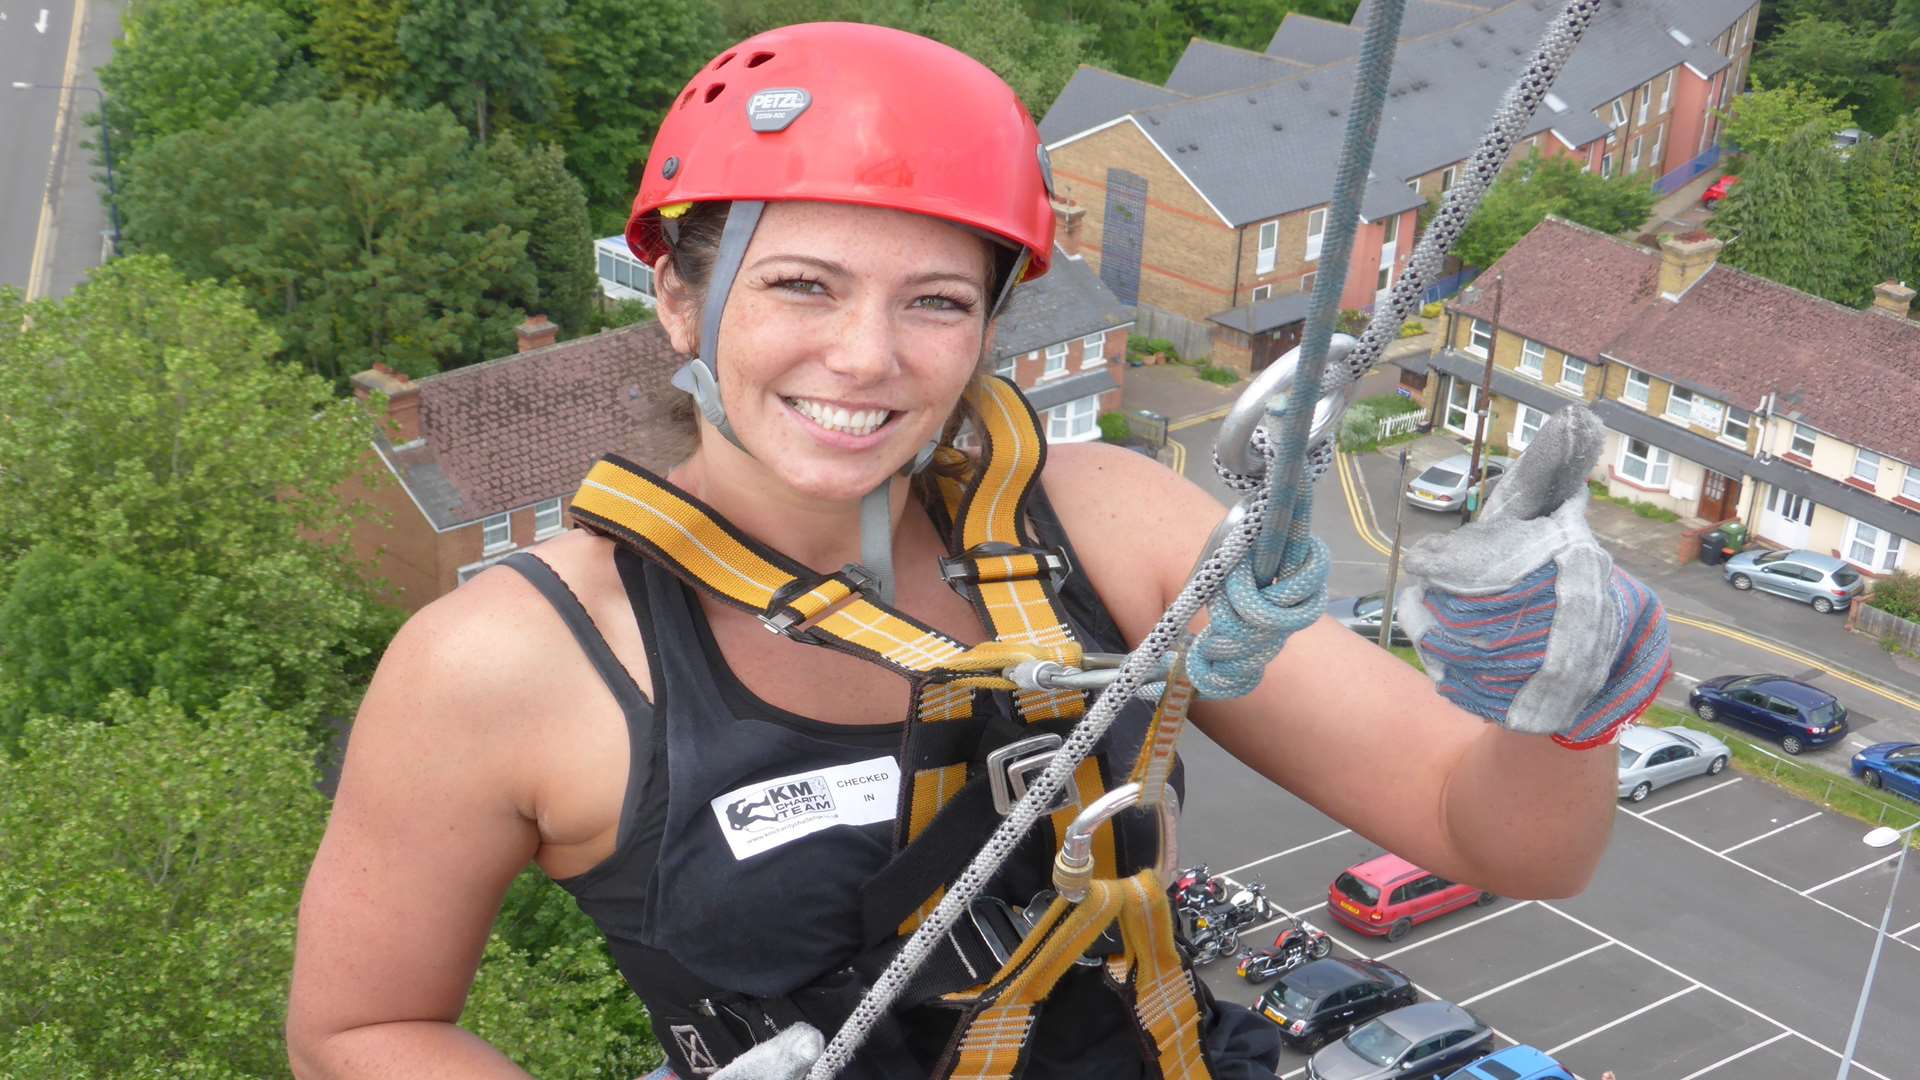 Maria Church of Chatham for Tiger Paws PTA Maidstone at the KM Abseil Challenge 2016.